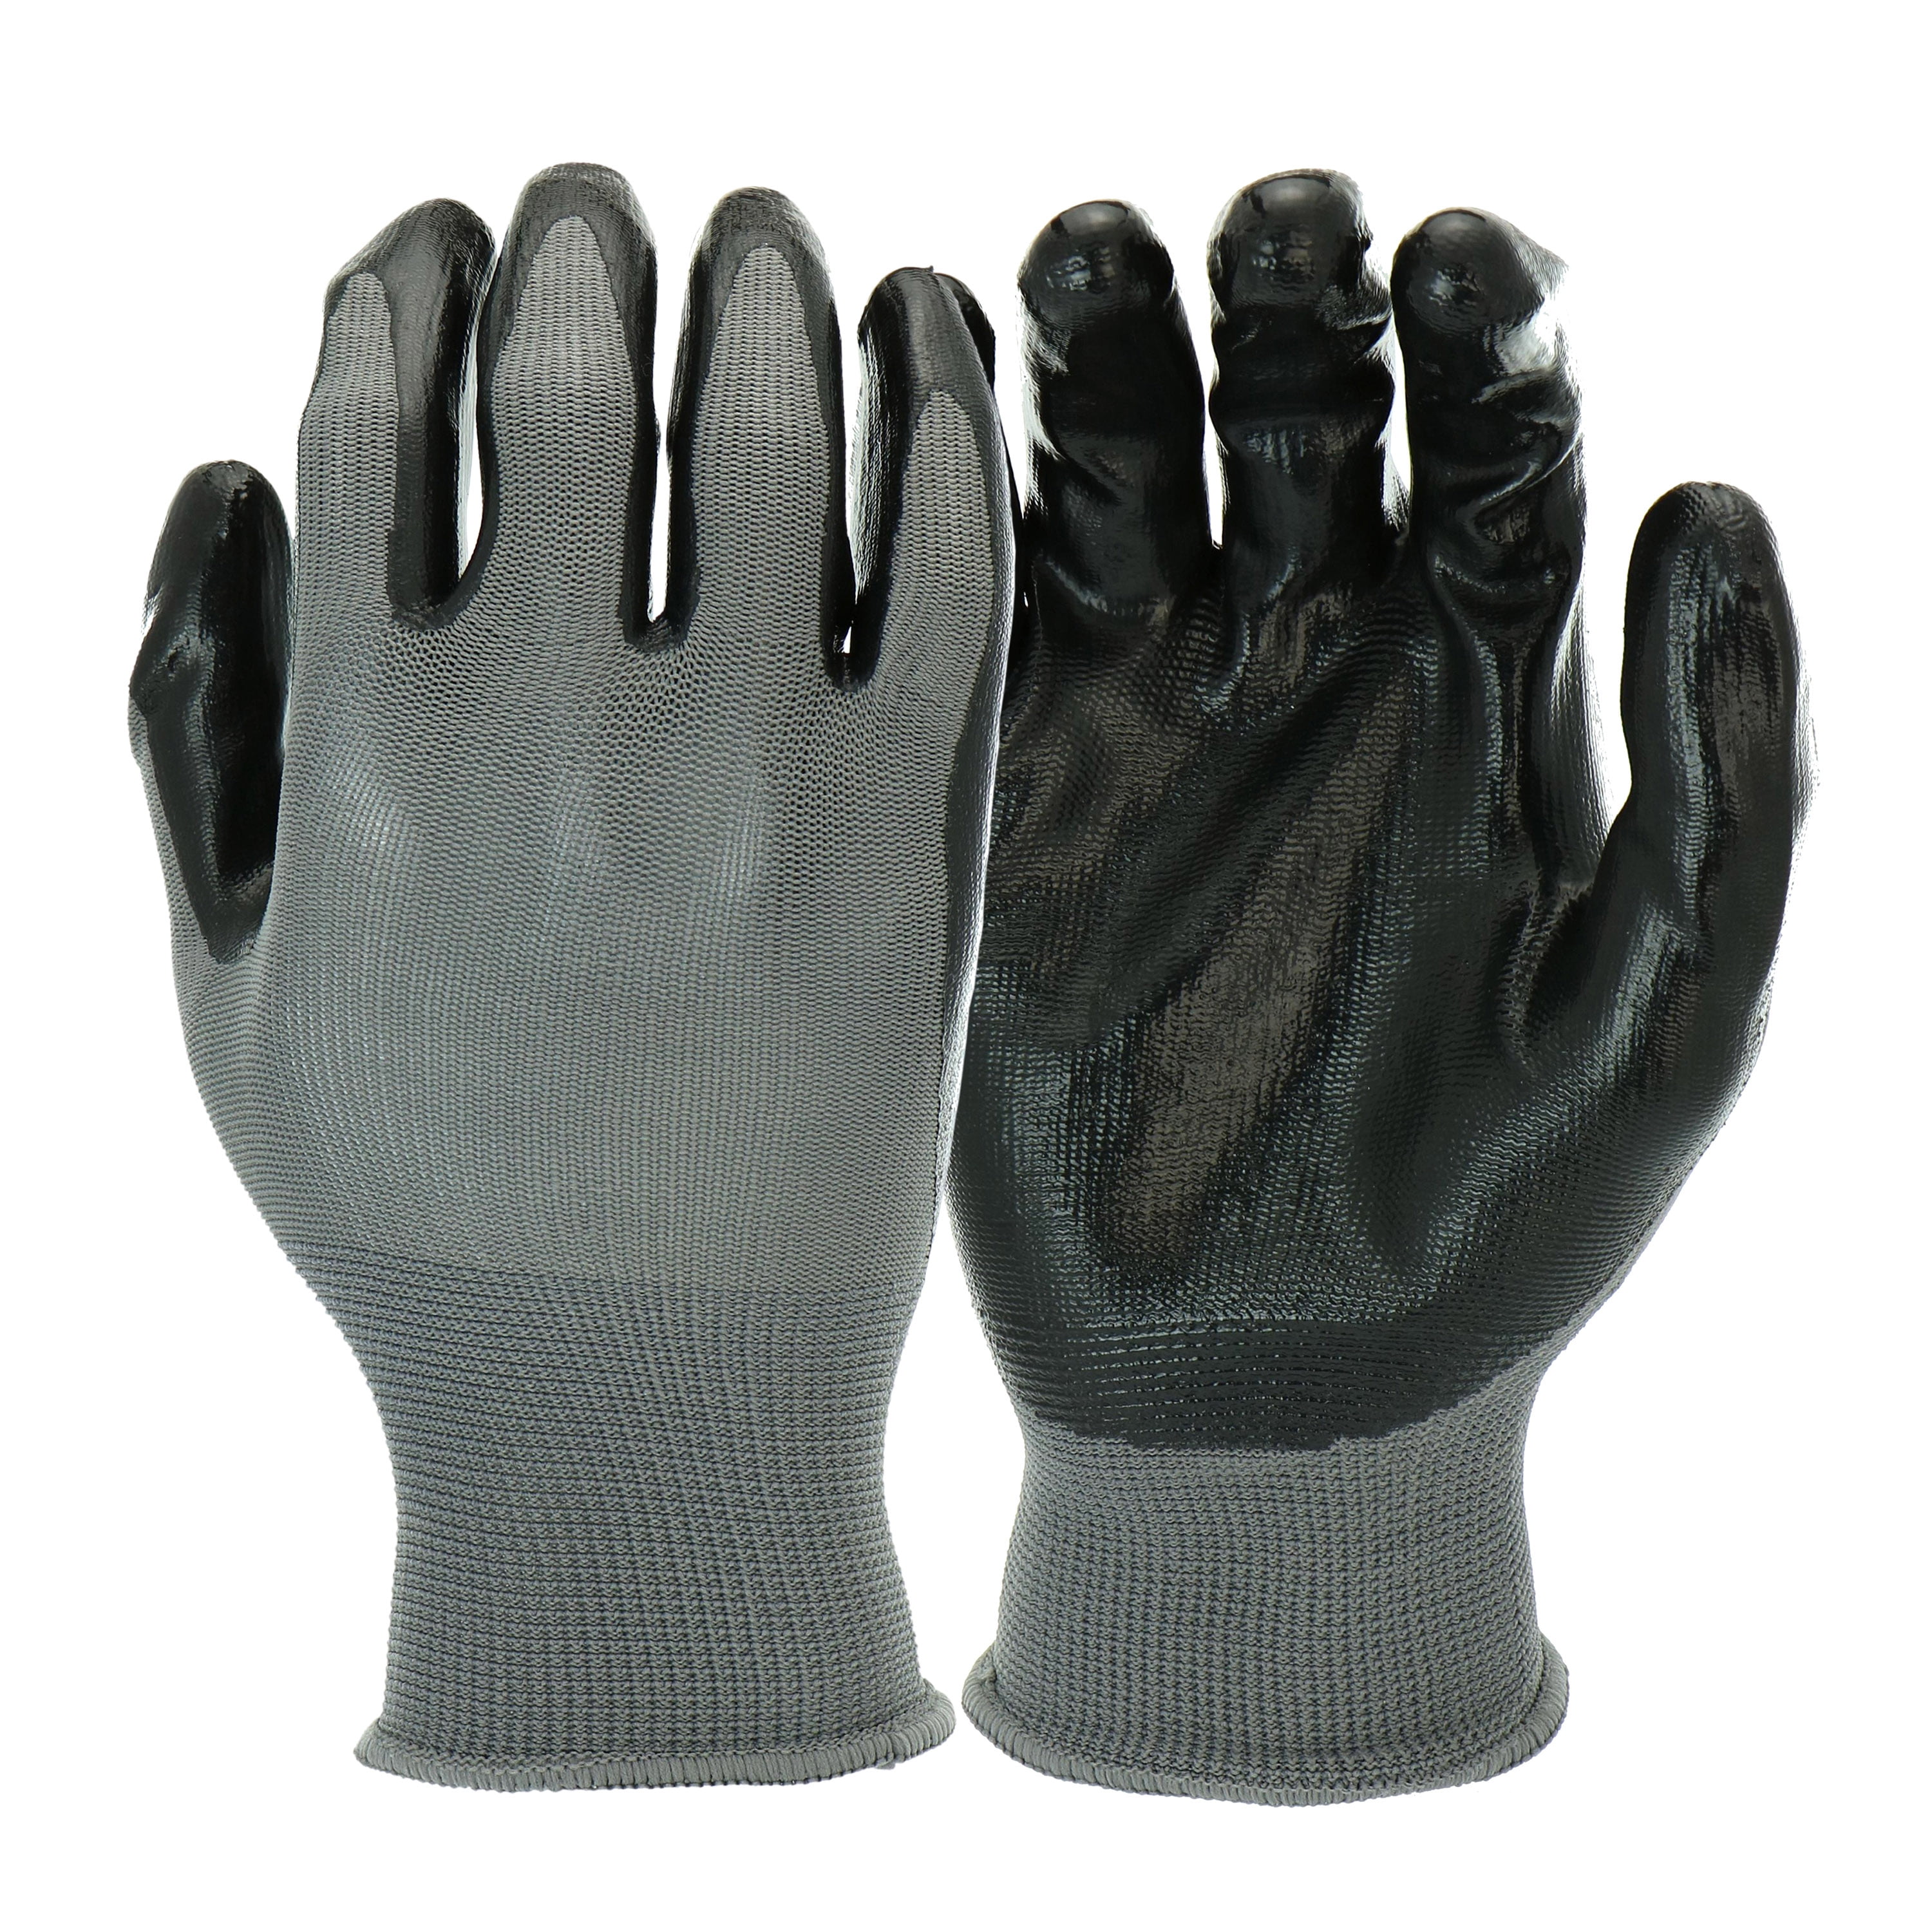 Textured Latex Palm for Grip 3 Pairs Pack Garden Work Gloves Thorn Resistance and Water Dirty Resistance